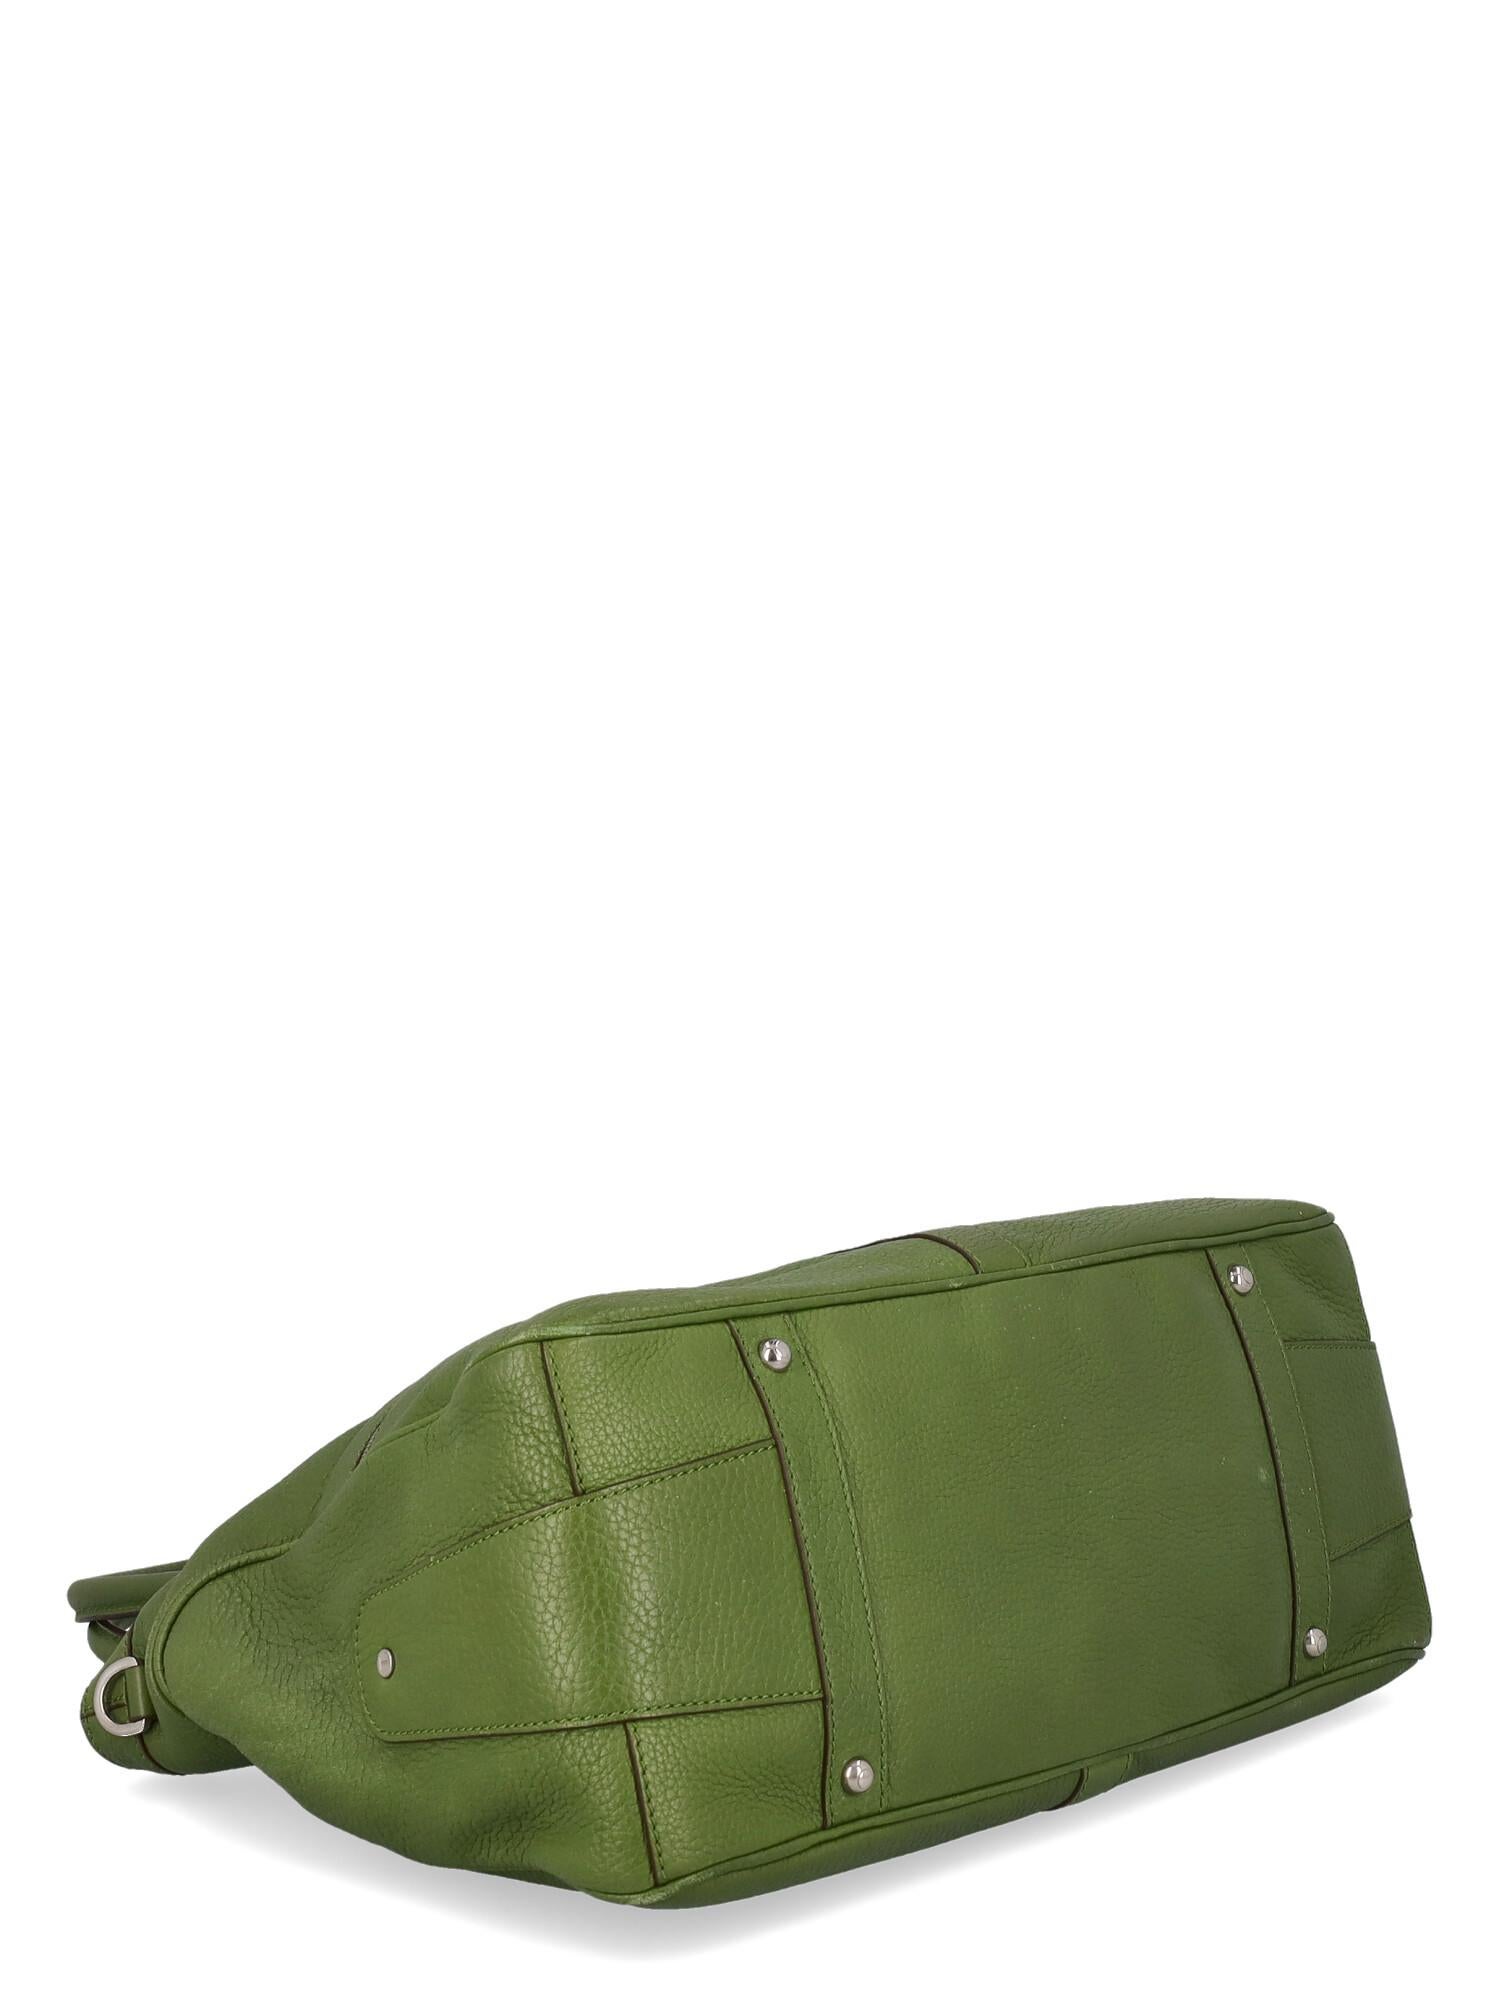 Tod'S  Women   Shoulder bags  Green Leather  In Good Condition For Sale In Milan, IT